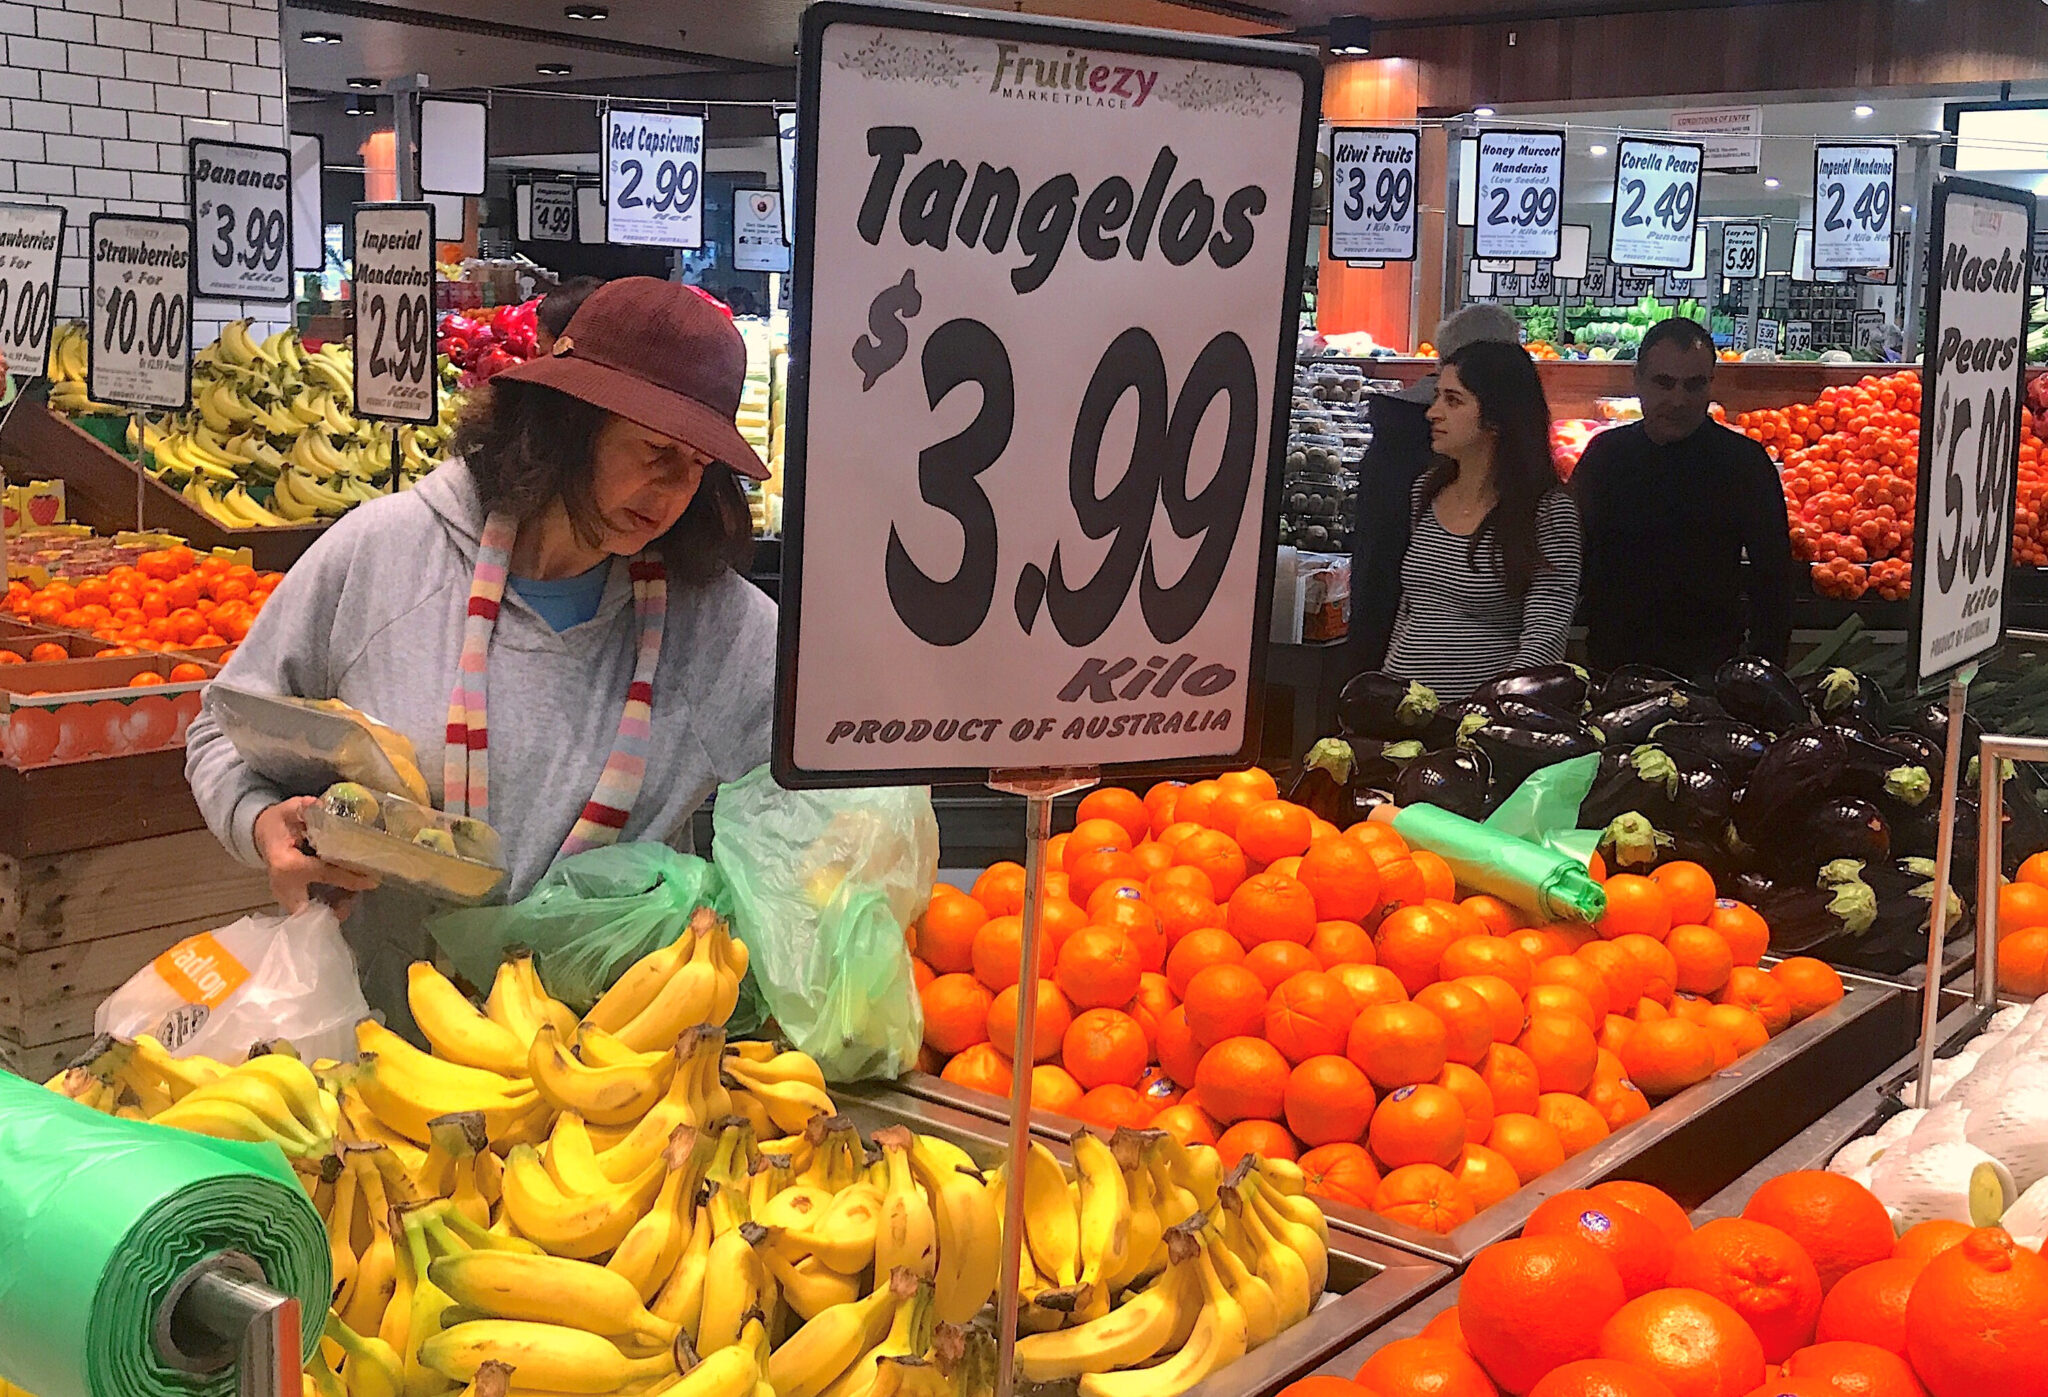 Shoppers look at fruits and vegetables at store in Sydney